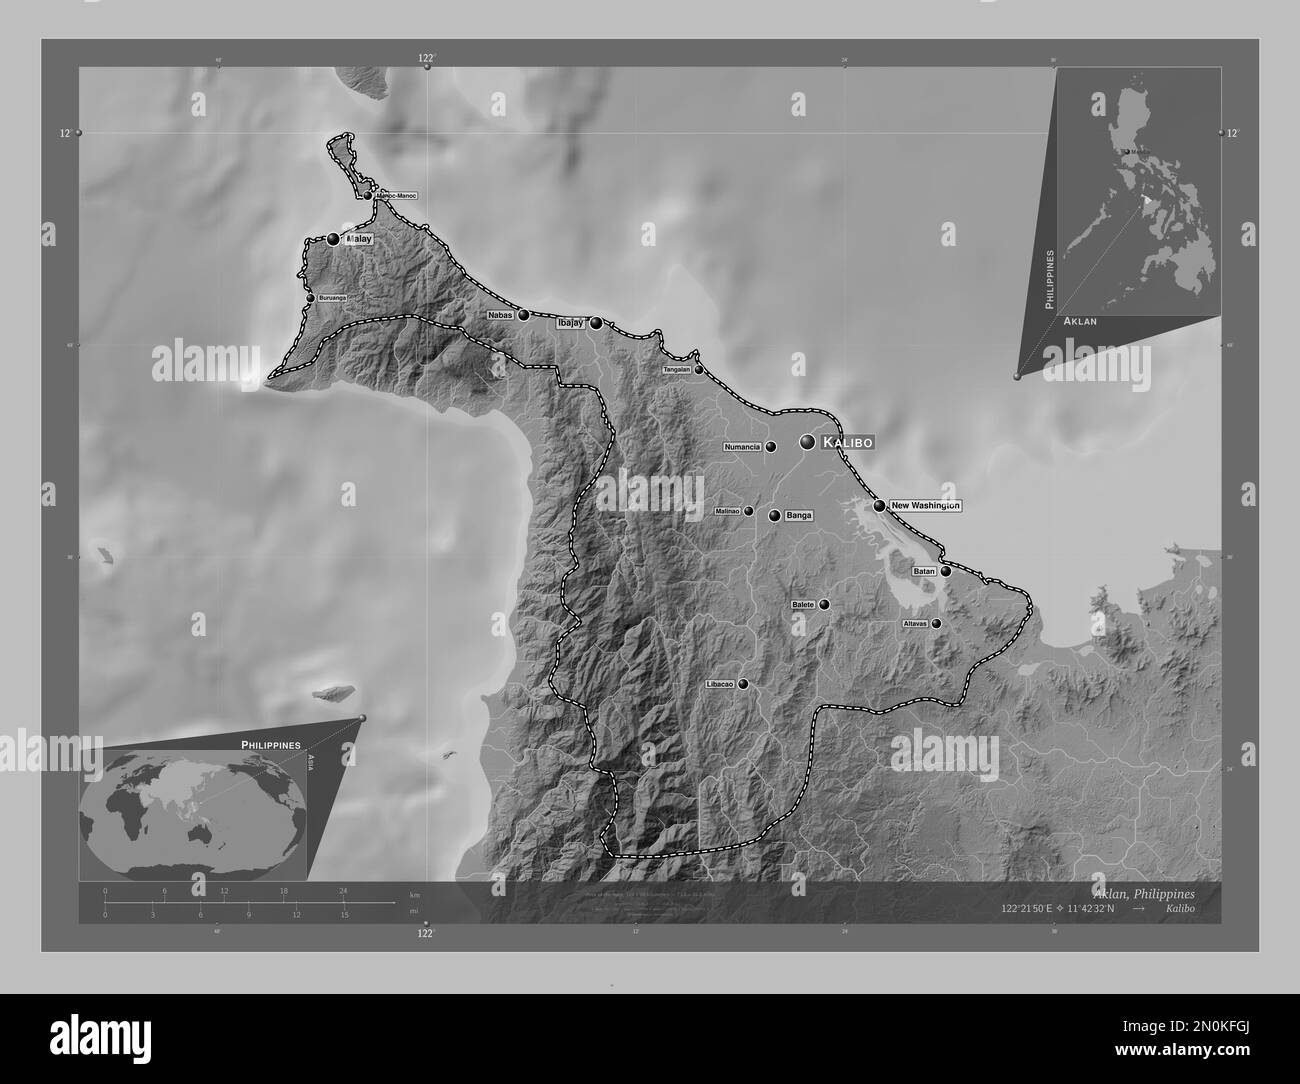 Aklan, province of Philippines. Grayscale elevation map with lakes and rivers. Locations and names of major cities of the region. Corner auxiliary loc Stock Photo